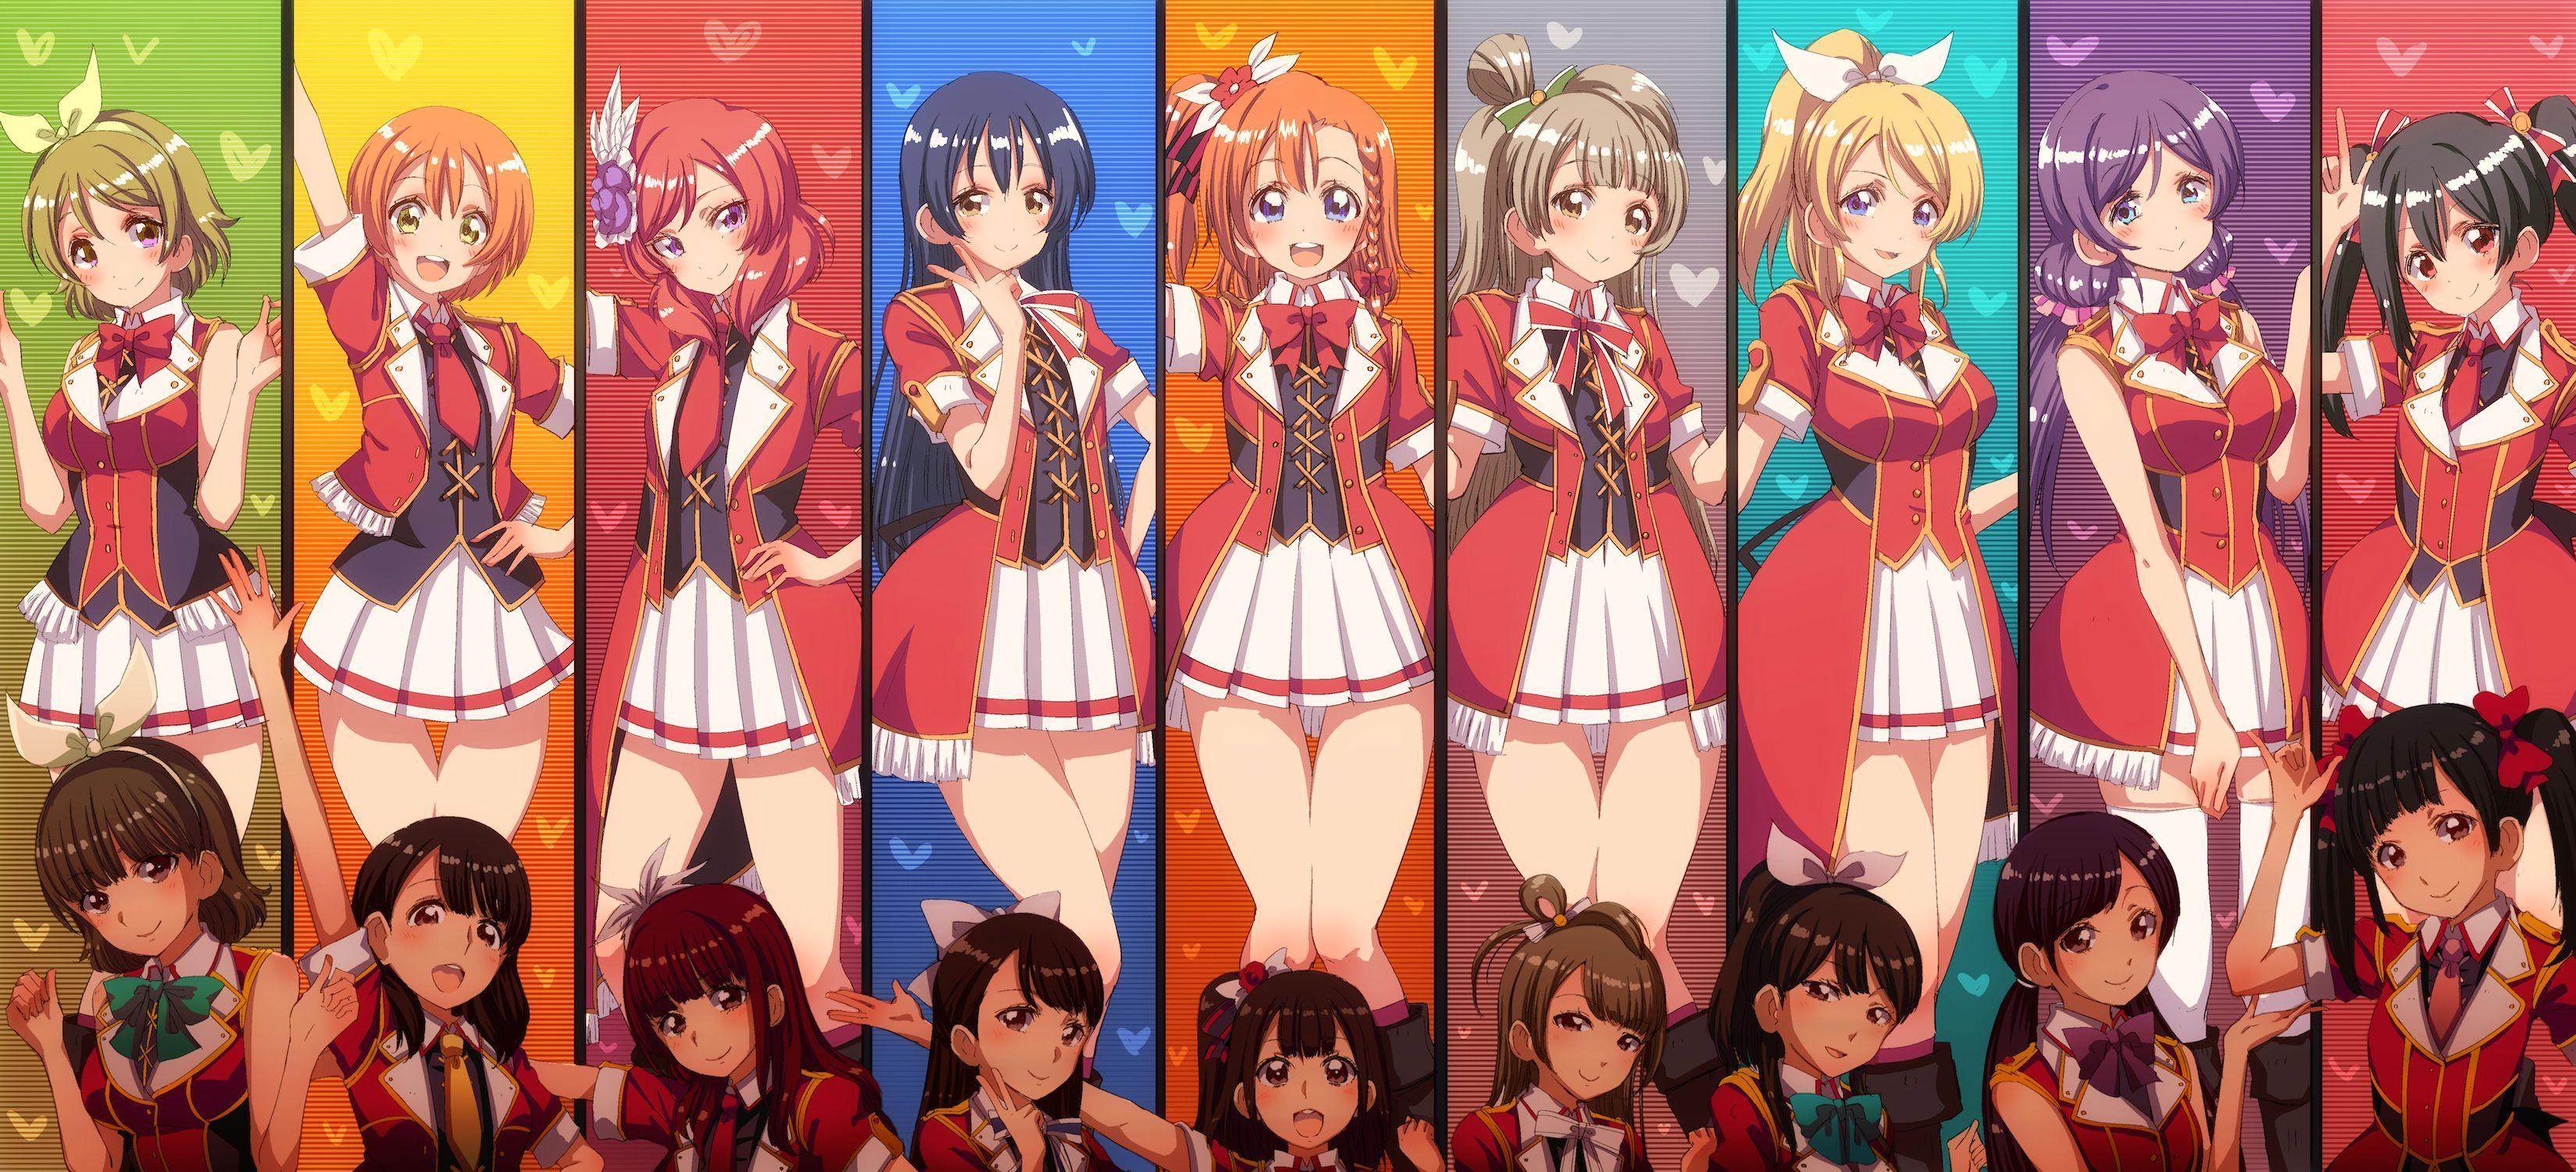 Love Live! Group Full HD Wallpaper and Background Imagex1500